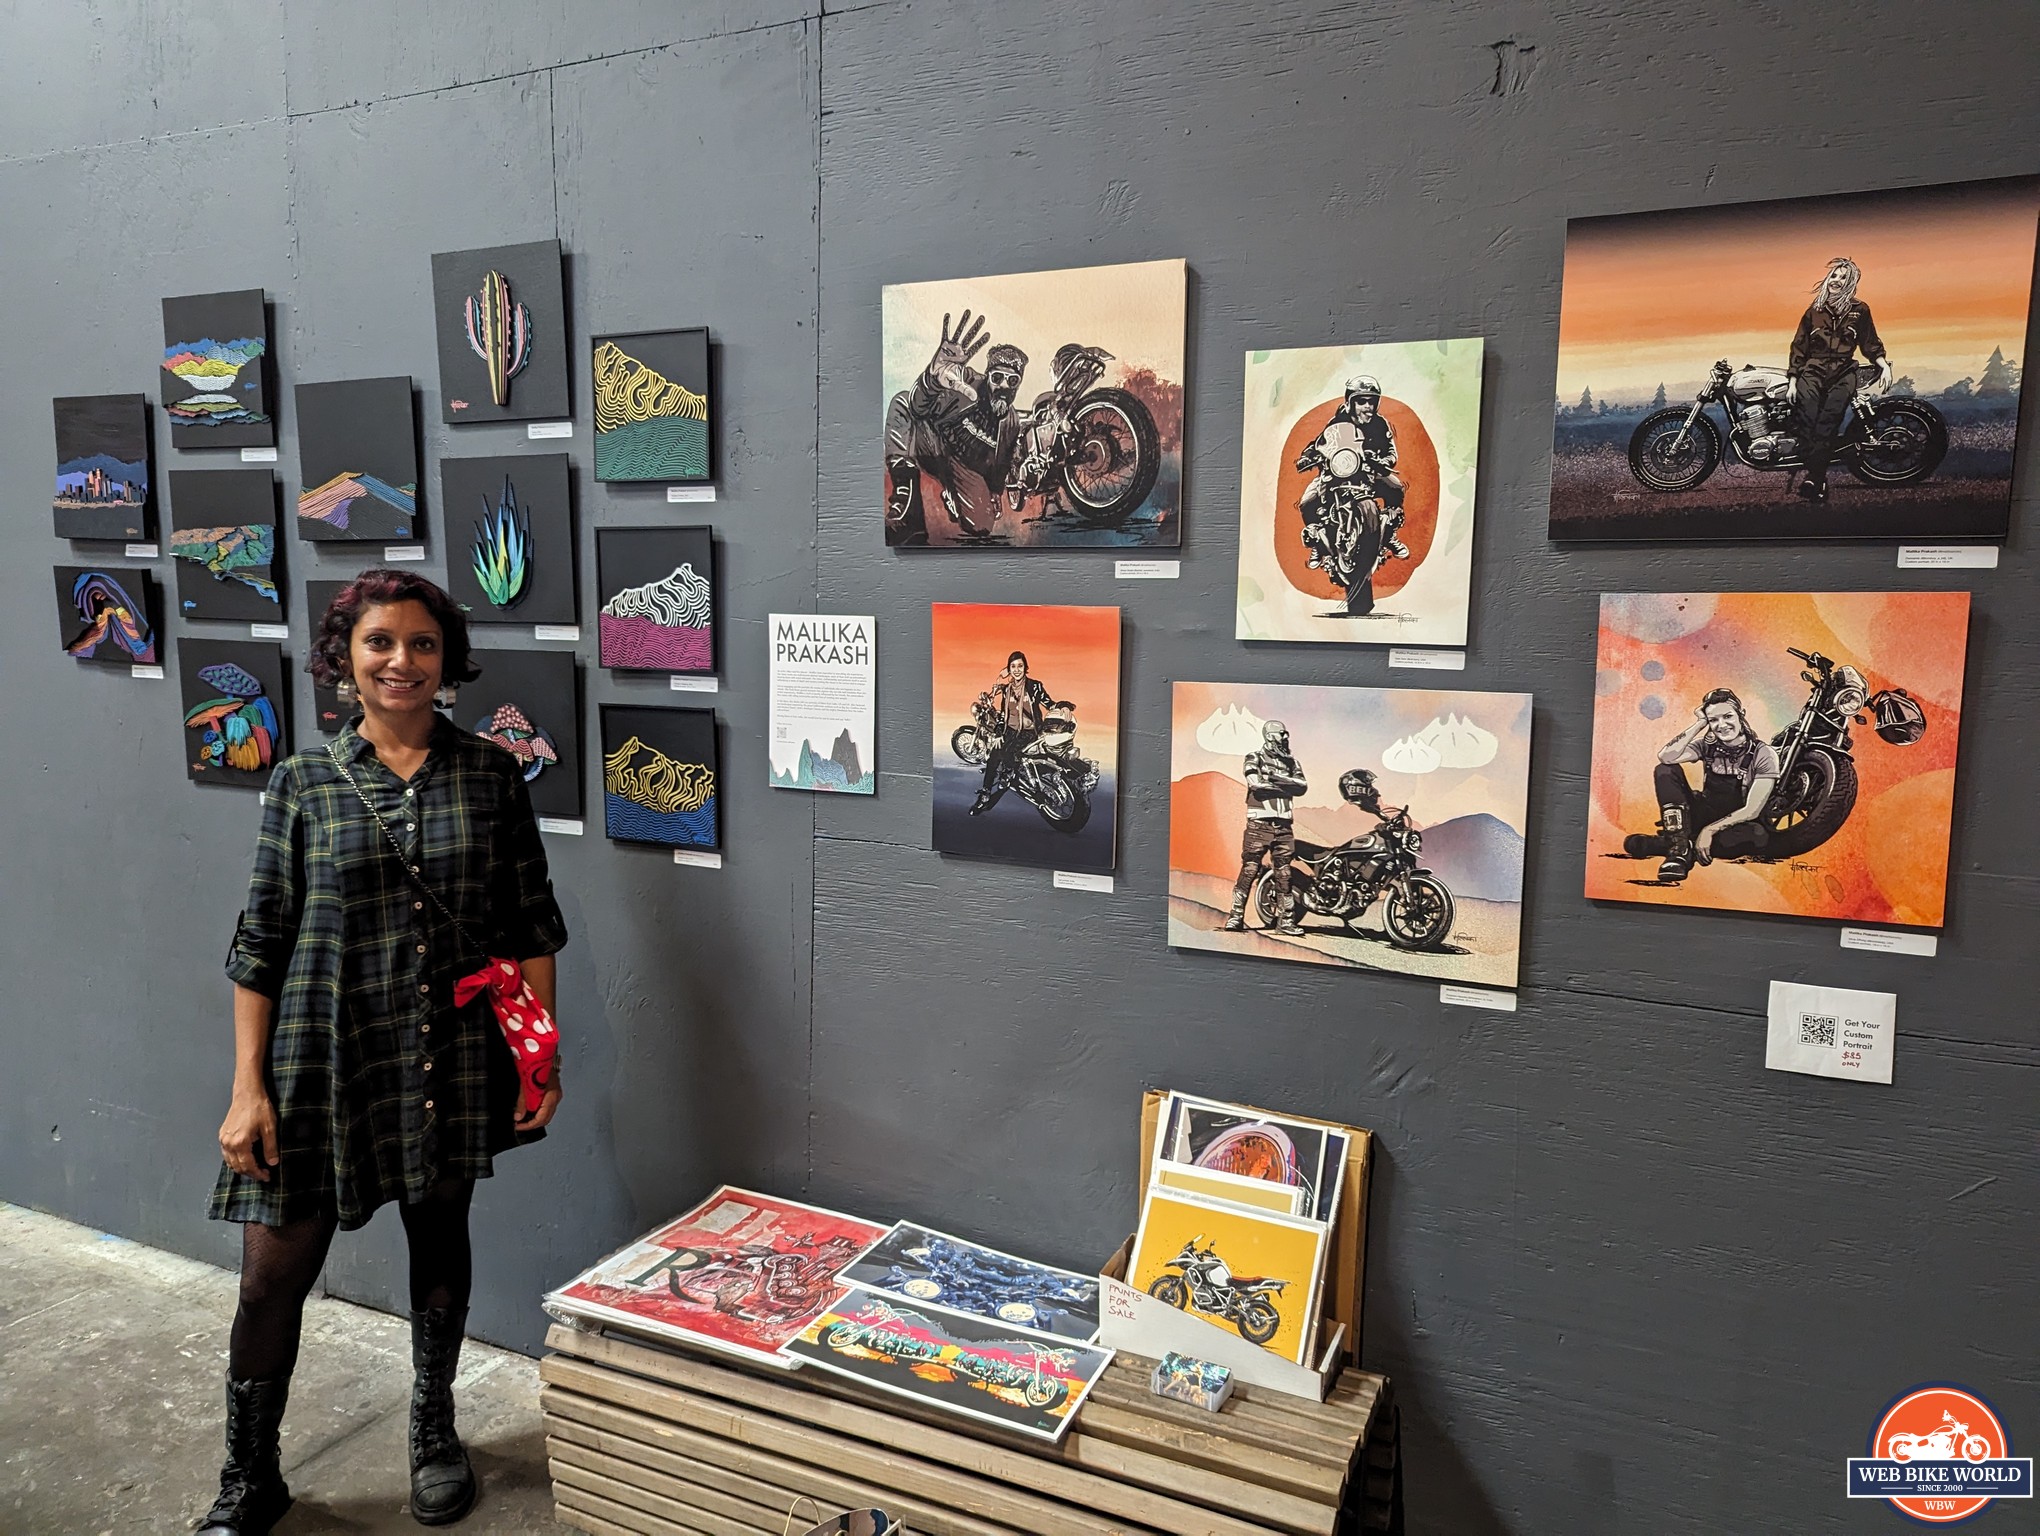 Millika Prakash standing in front of her artwork exhibit at the Women's Motorcycle Show 2023.